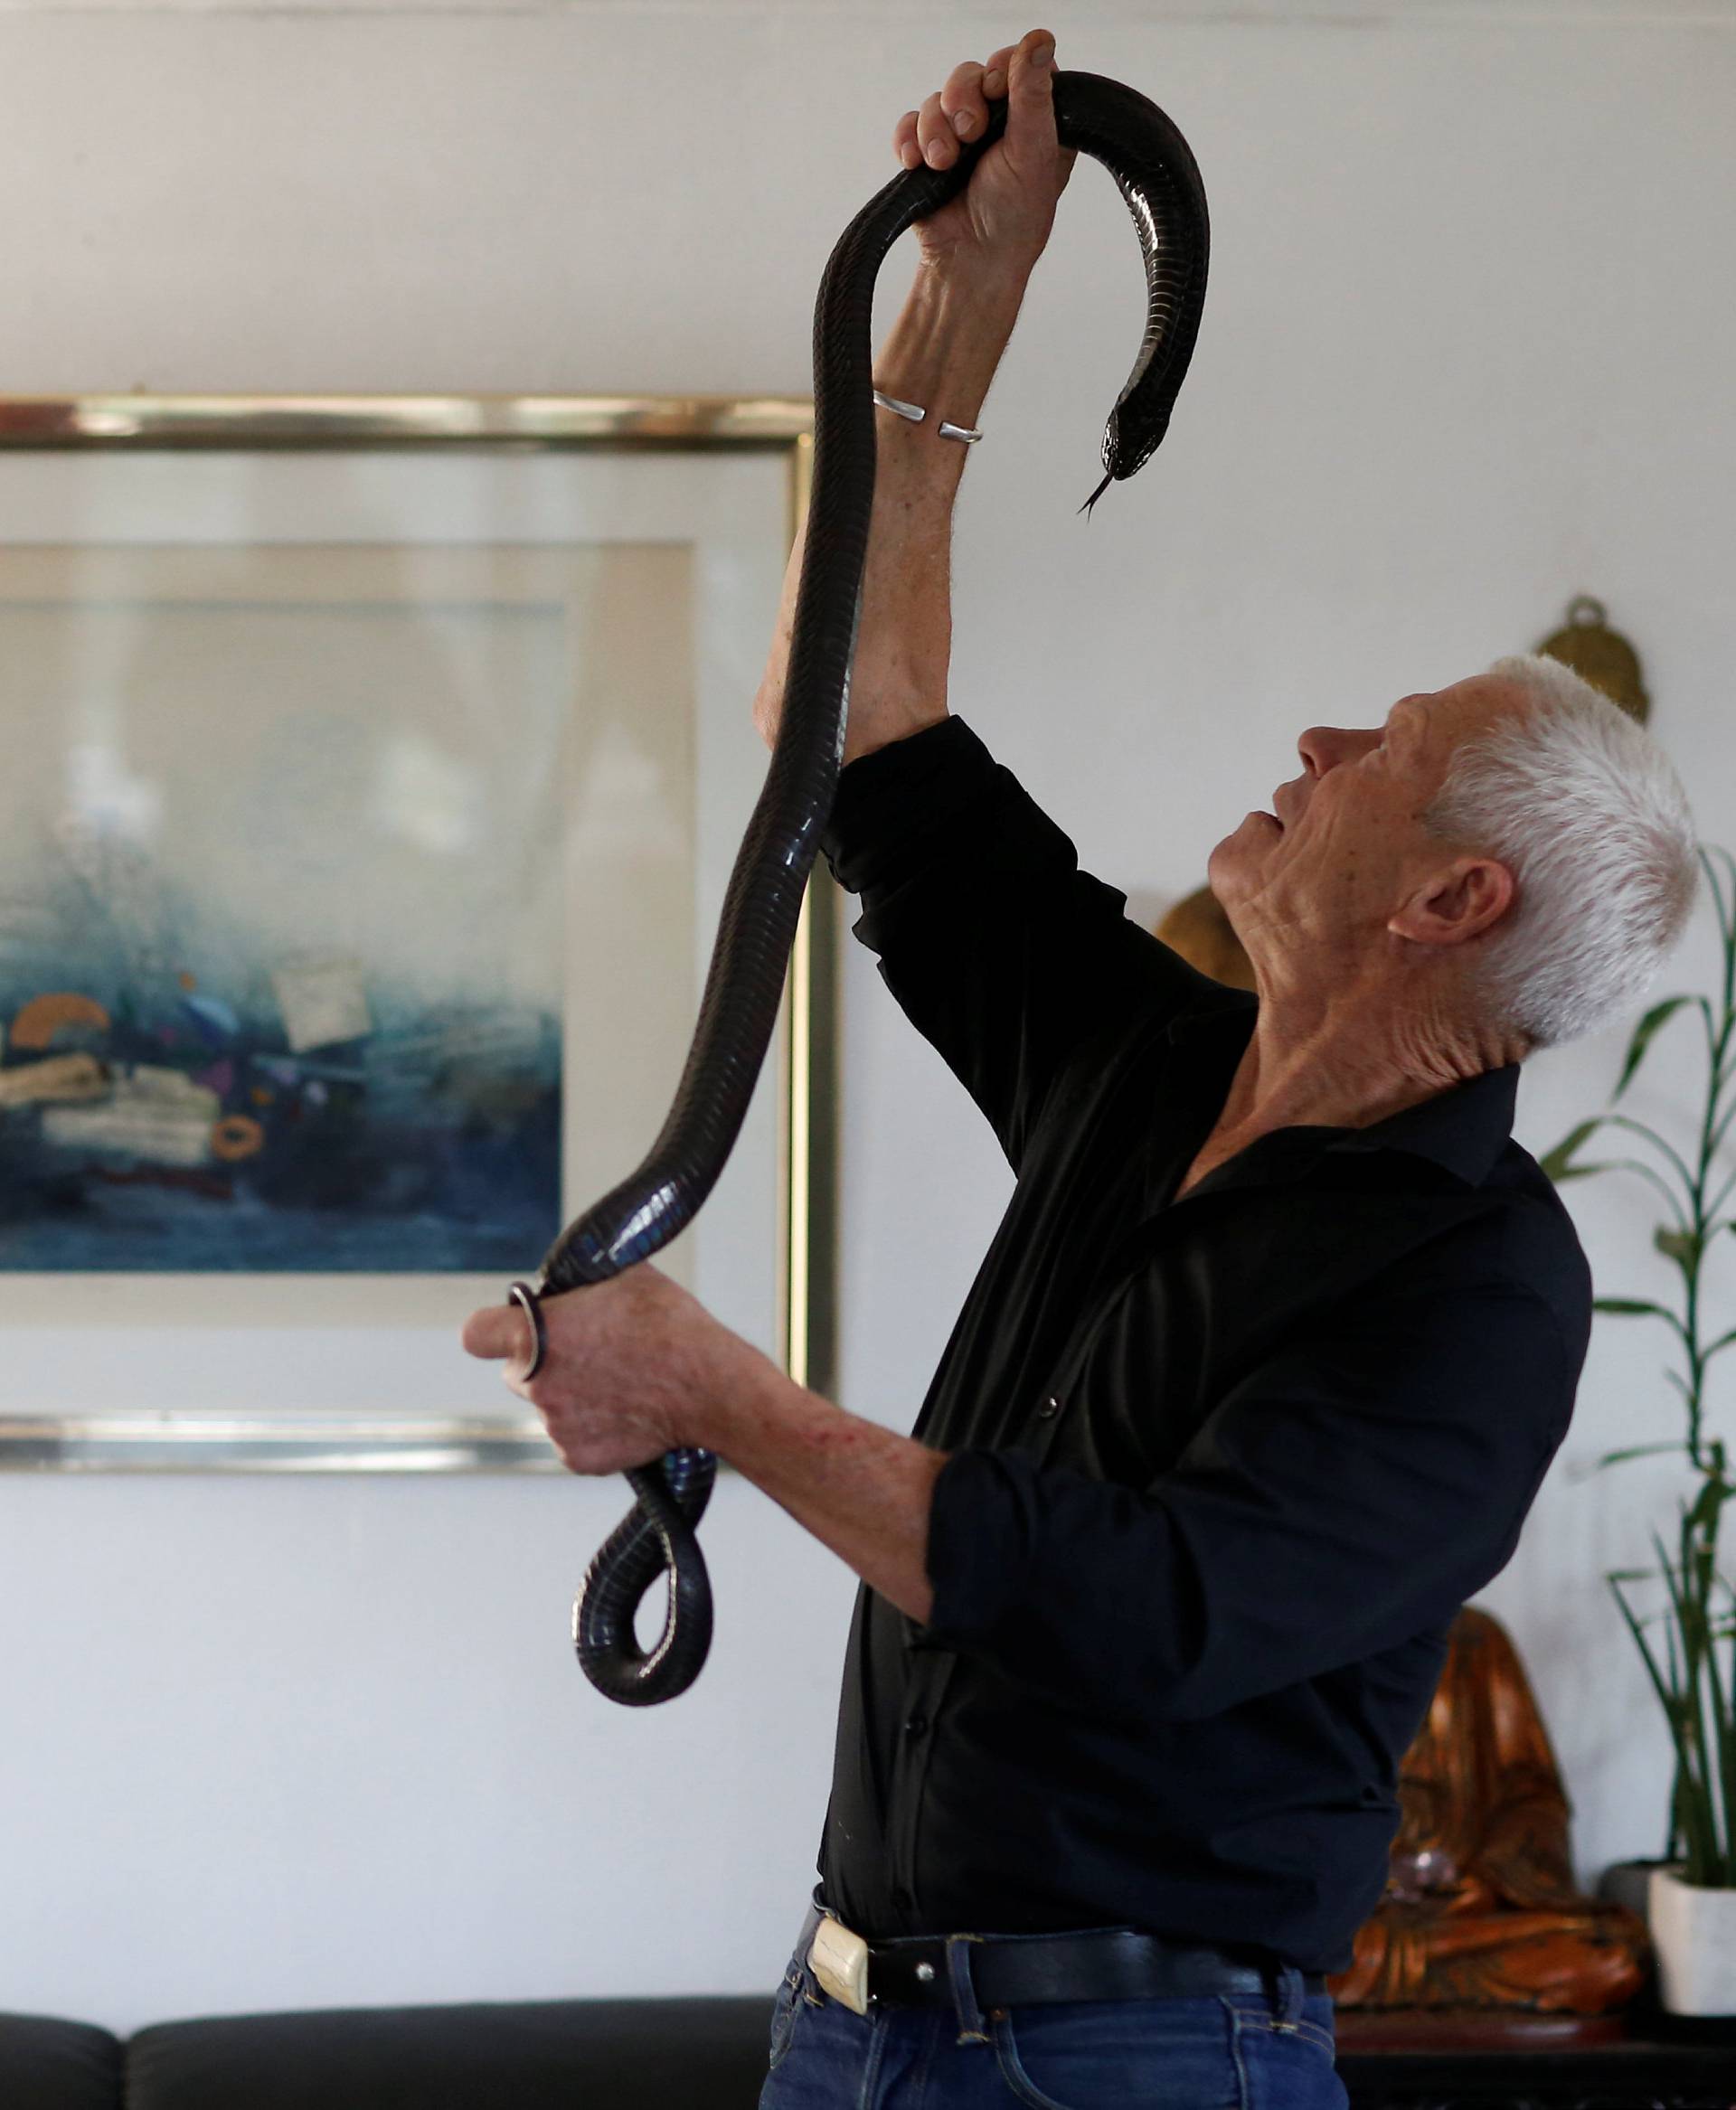 Philippe Gillet, 67 year-old Frenchman who lives with more than 400 reptiles and tamed alligators, looks at his black cobra in his living room in Coueron near Nantes